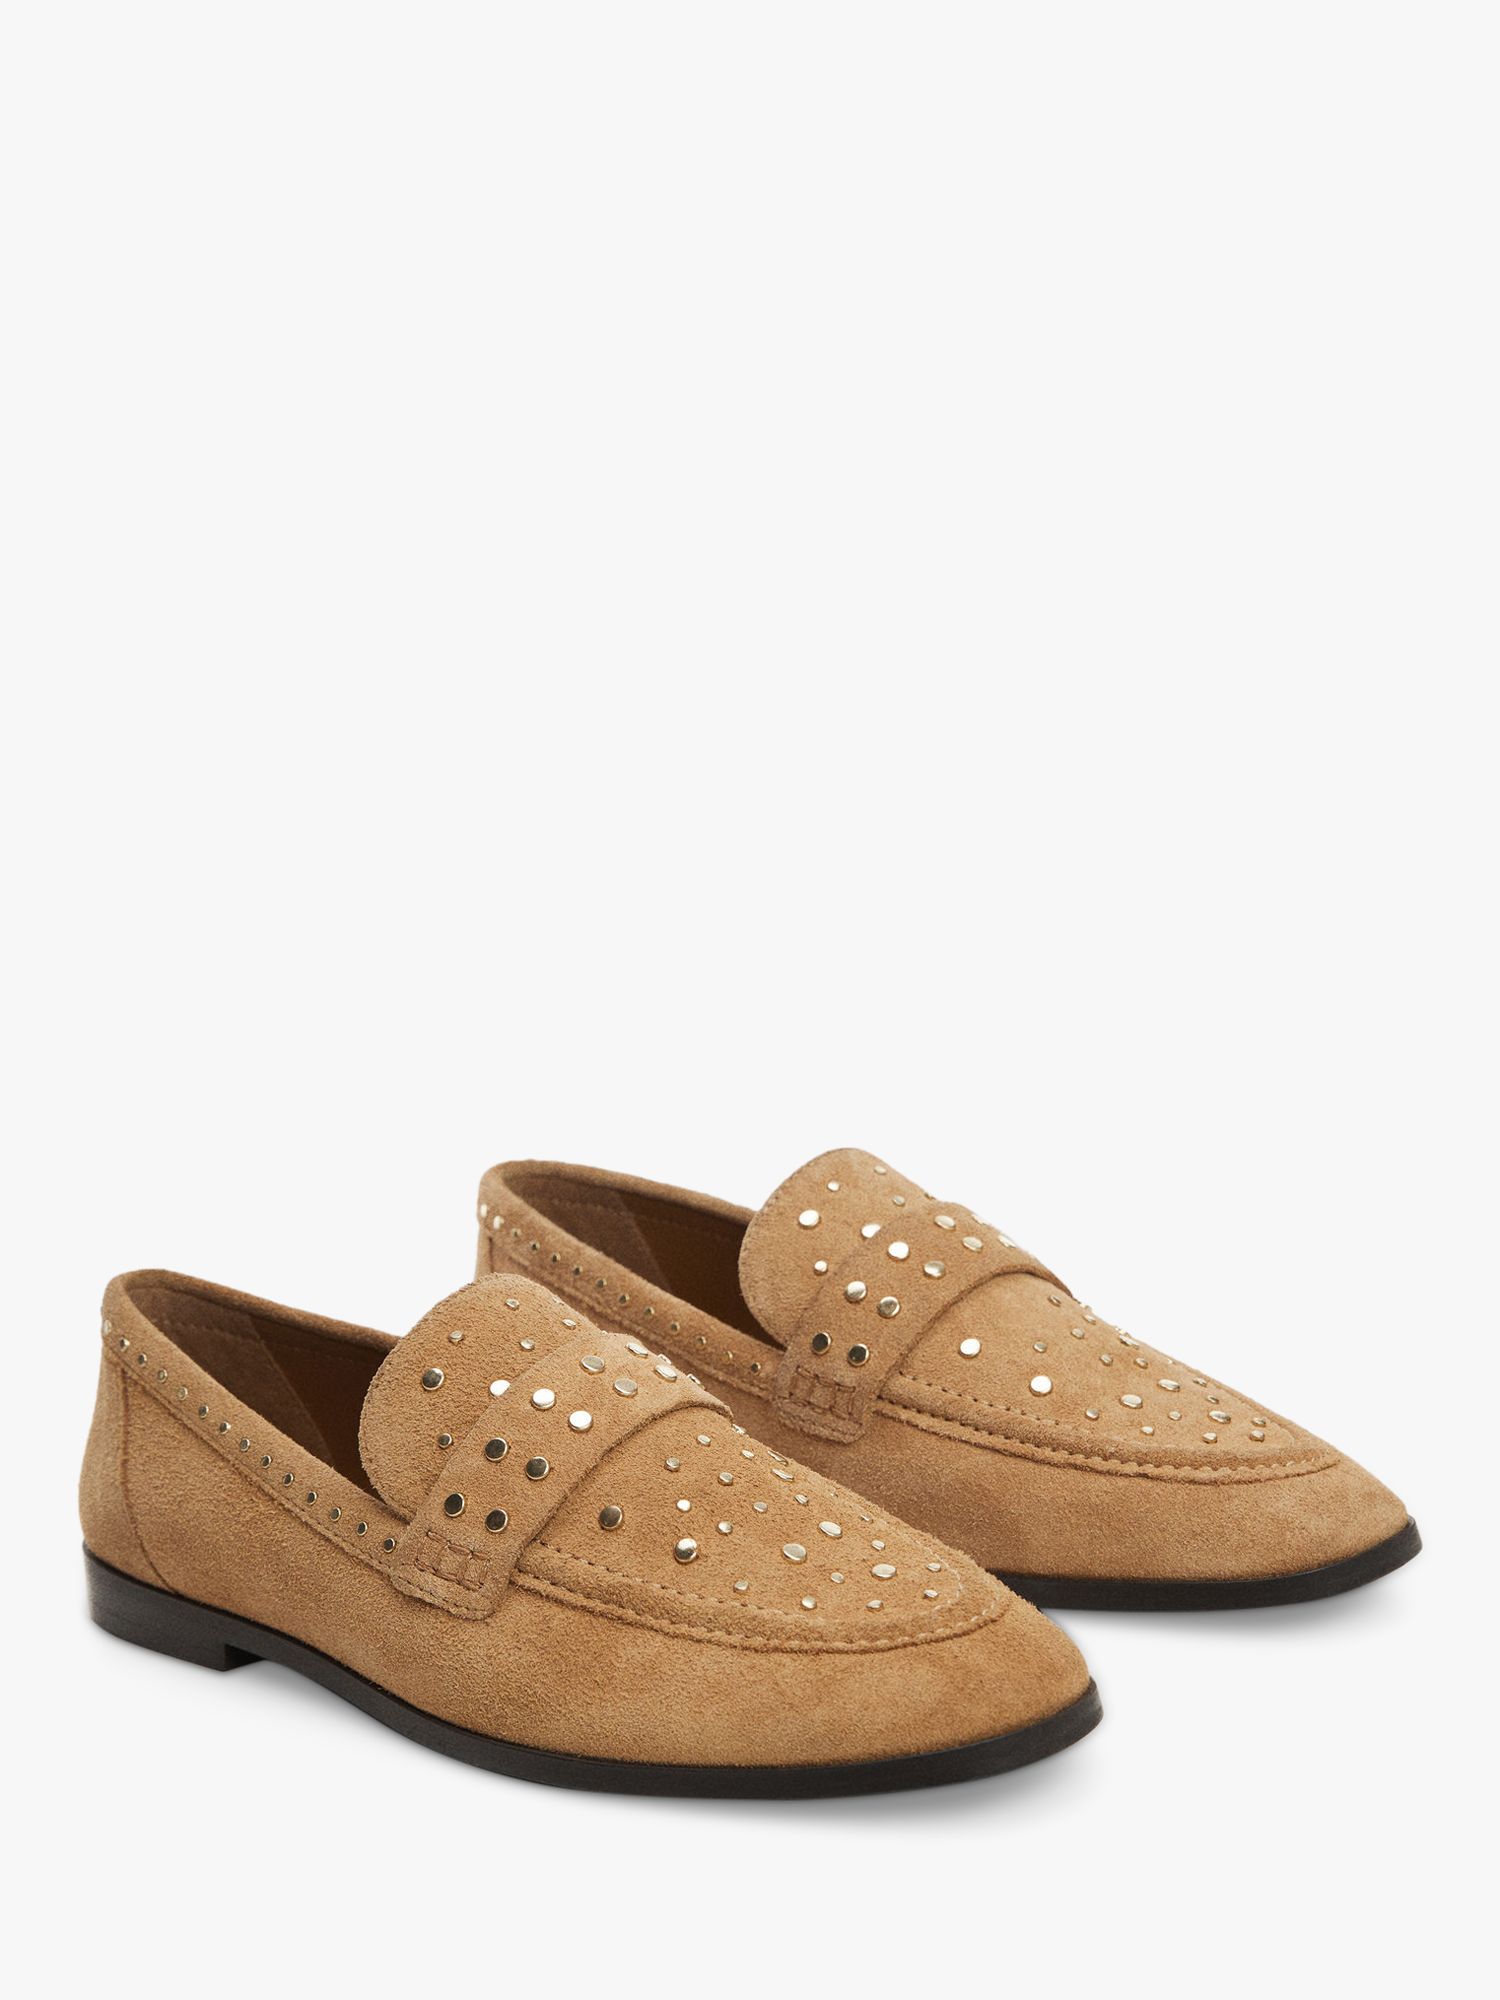 Mango Curro Studded Suede Loafers, Brown, 3